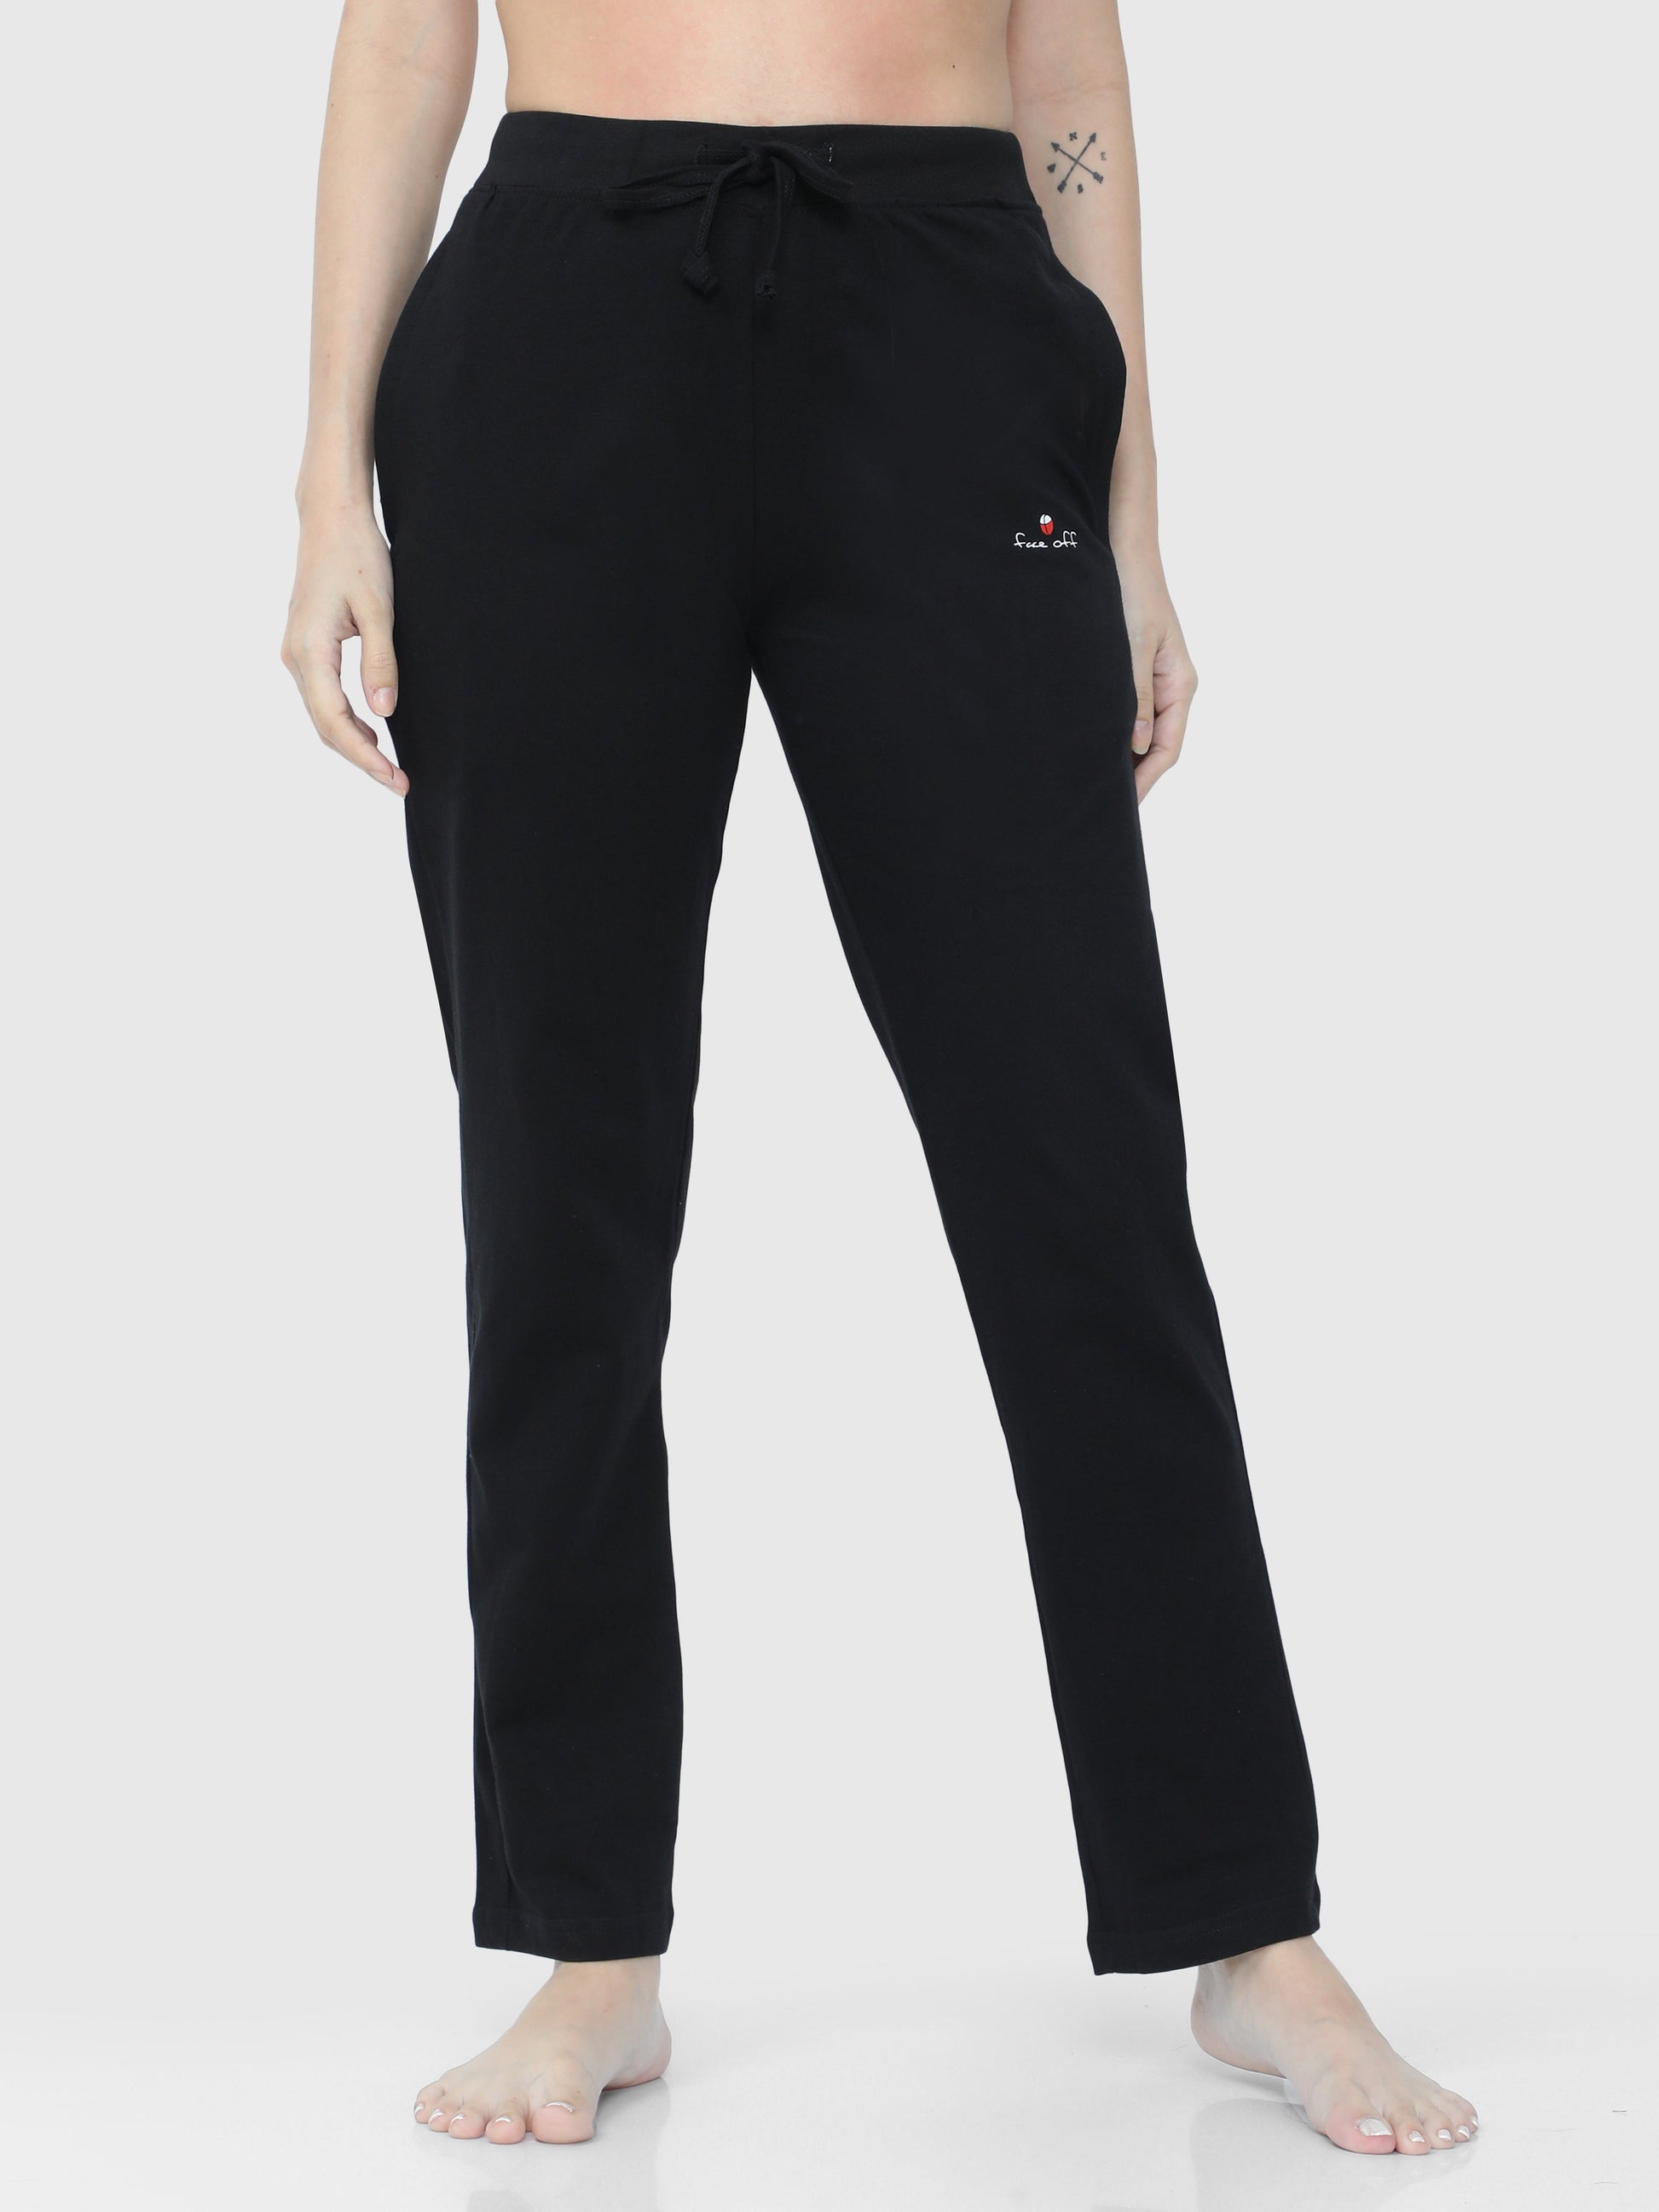 Midnight Black Solid Track Pants CWPT-17301